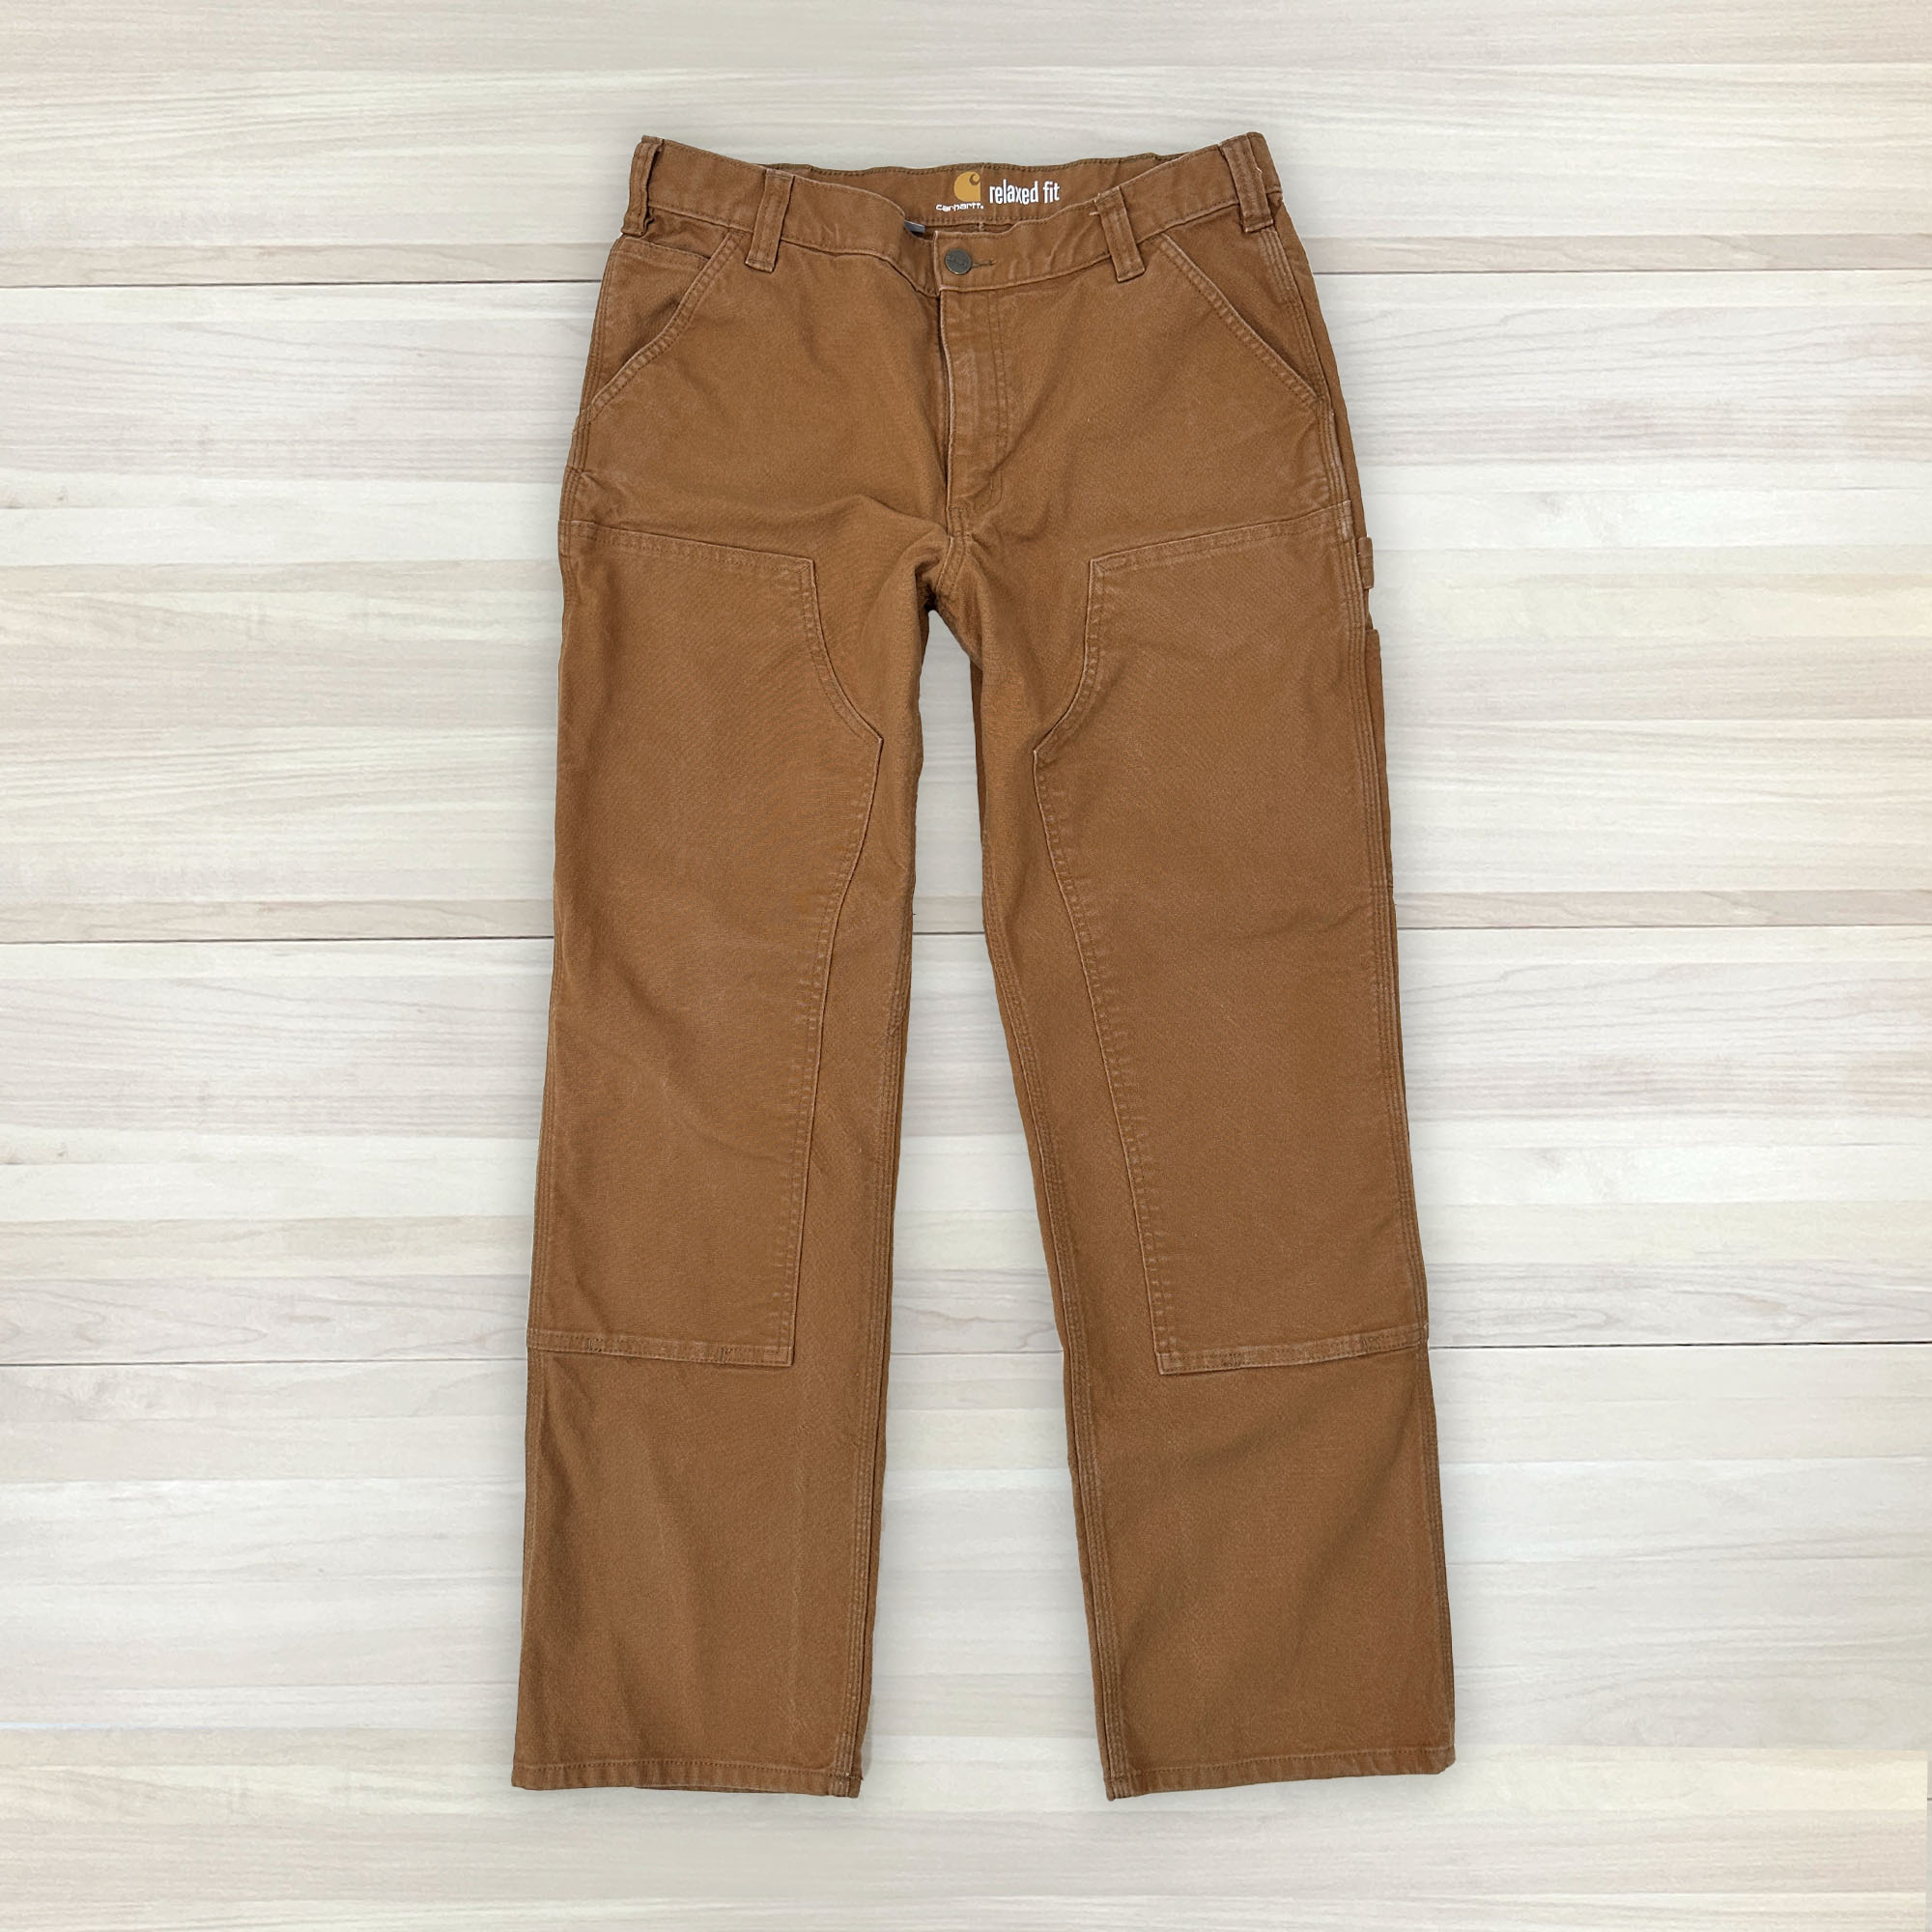 Men's Carhartt Rugged Flex Relaxed Fit Duck Double Front Utility Work Pants  - 34x31 at Great Lakes Reclaimed Denim